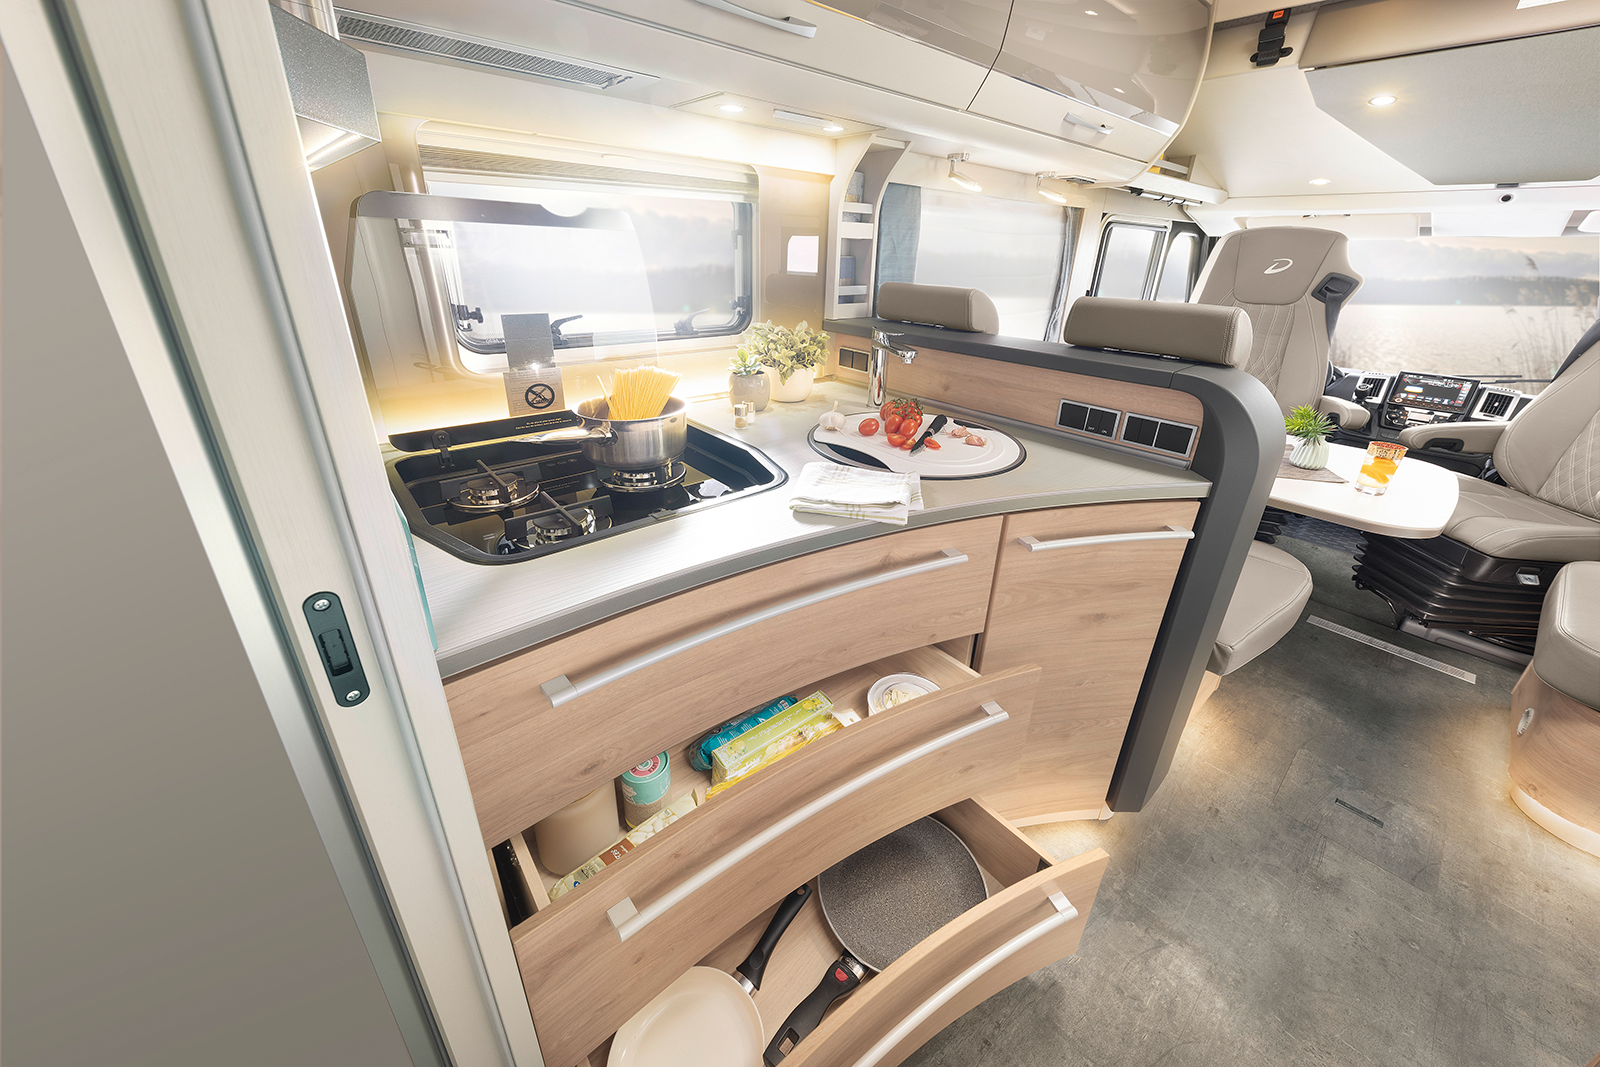 Abundant storage space is provided thanks to the large drawers which lock automatically when driving. The cooker hood removes unpleasant odours from the vehicle’s interior